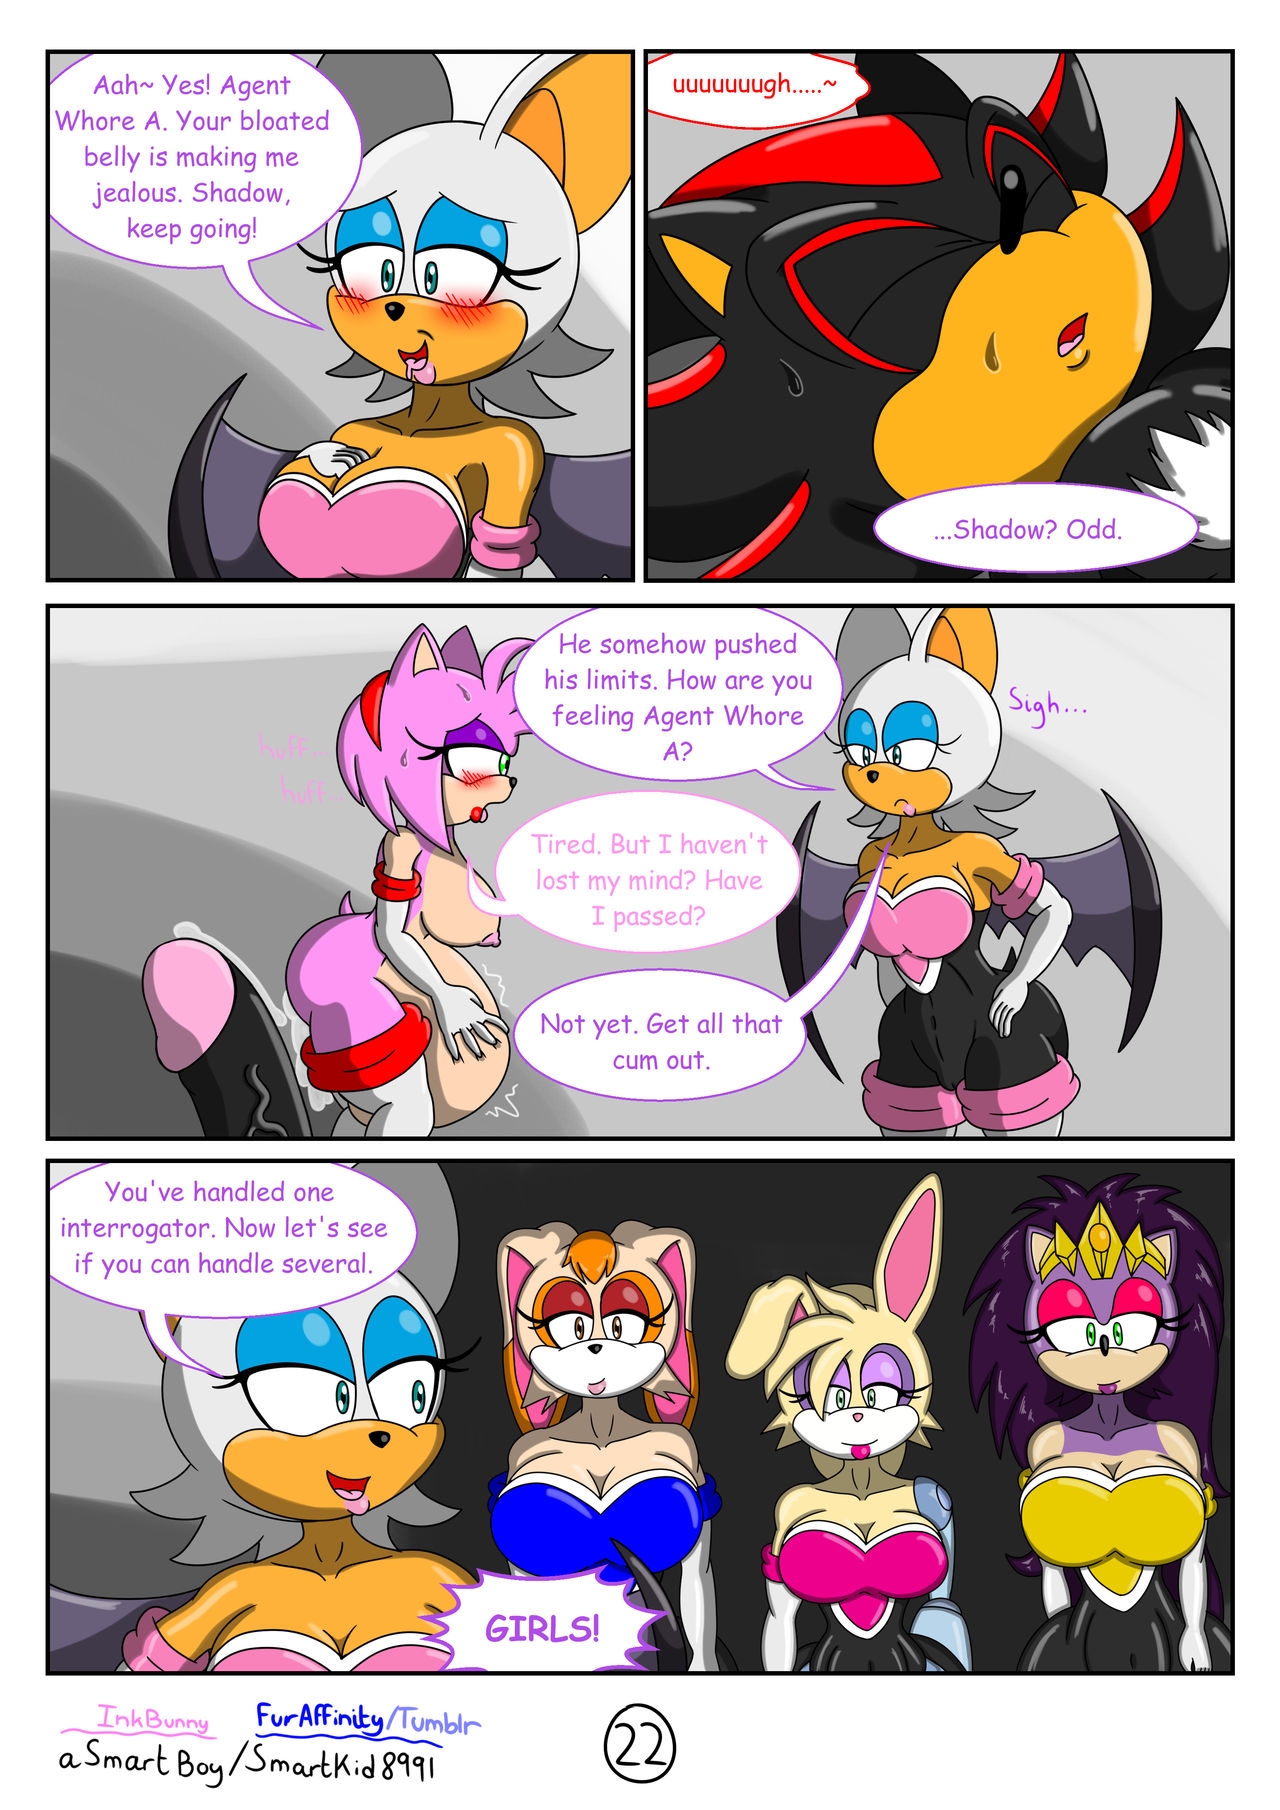 [SmartKid8991] Agent Whore Bootcamp (Sonic The Hedgehog) [Ongoing] 22